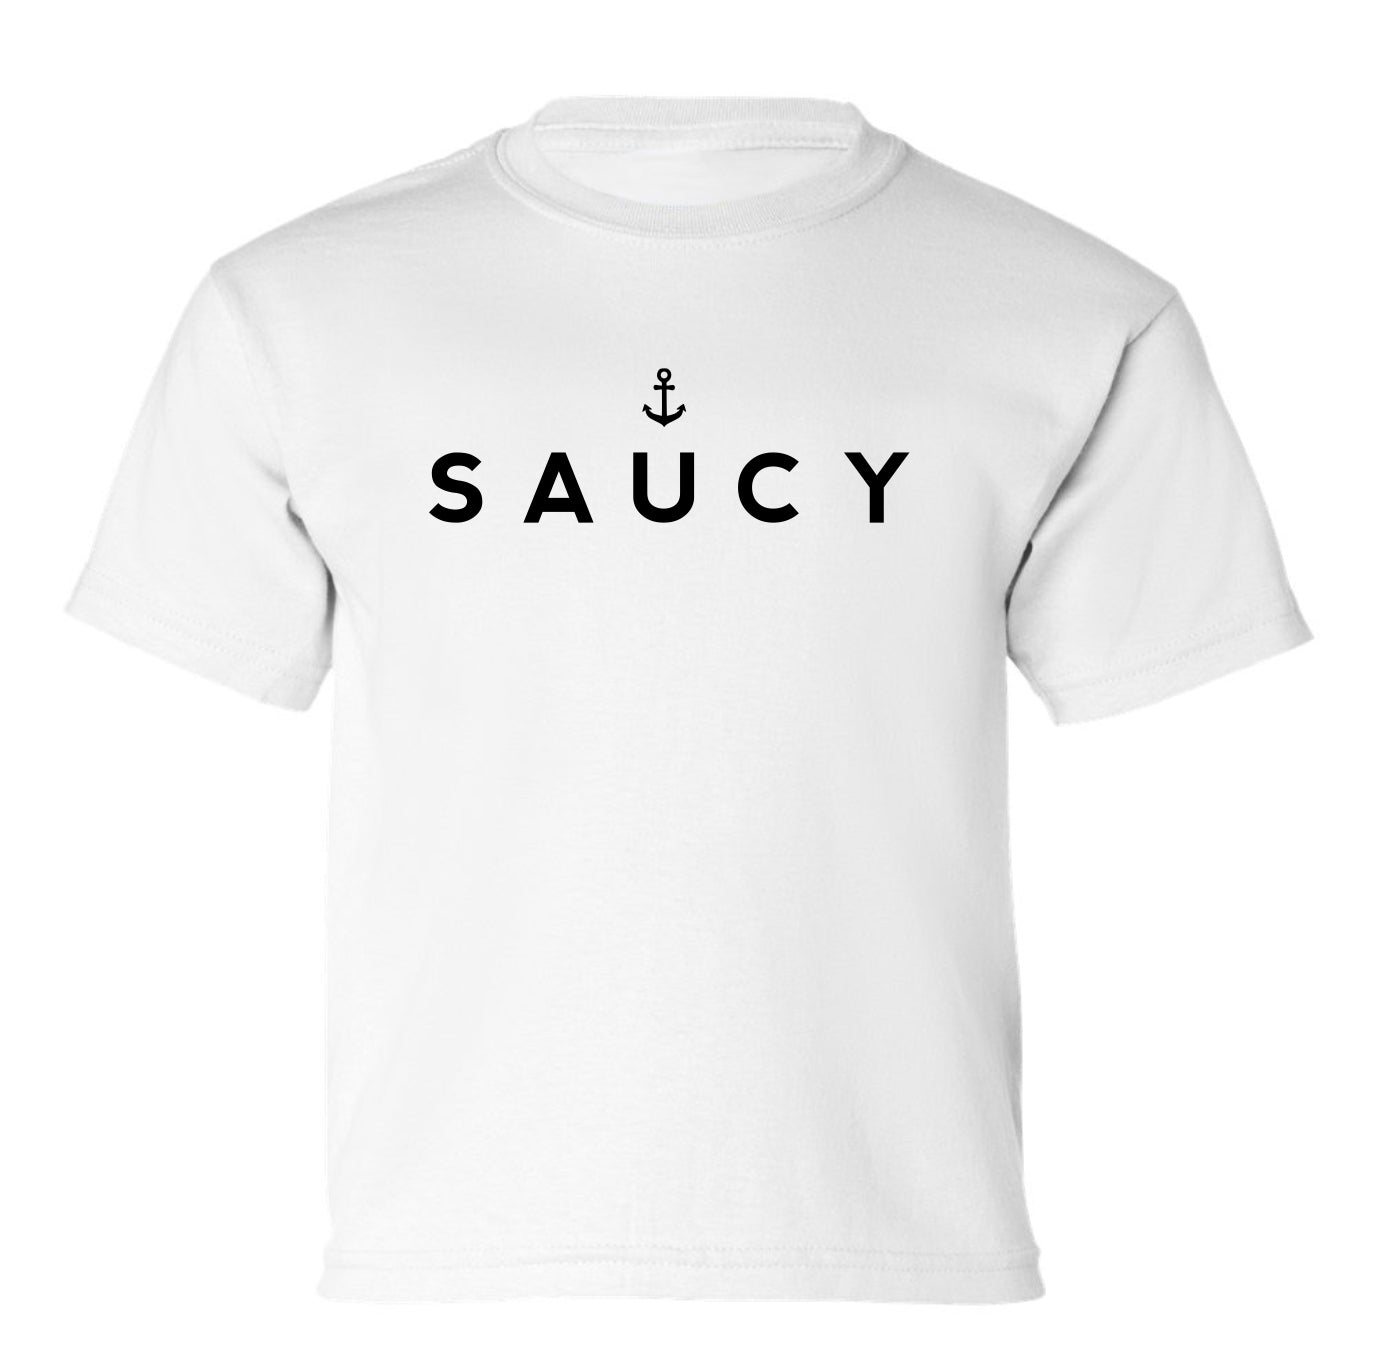 "Saucy" Toddler/Youth T-Shirt